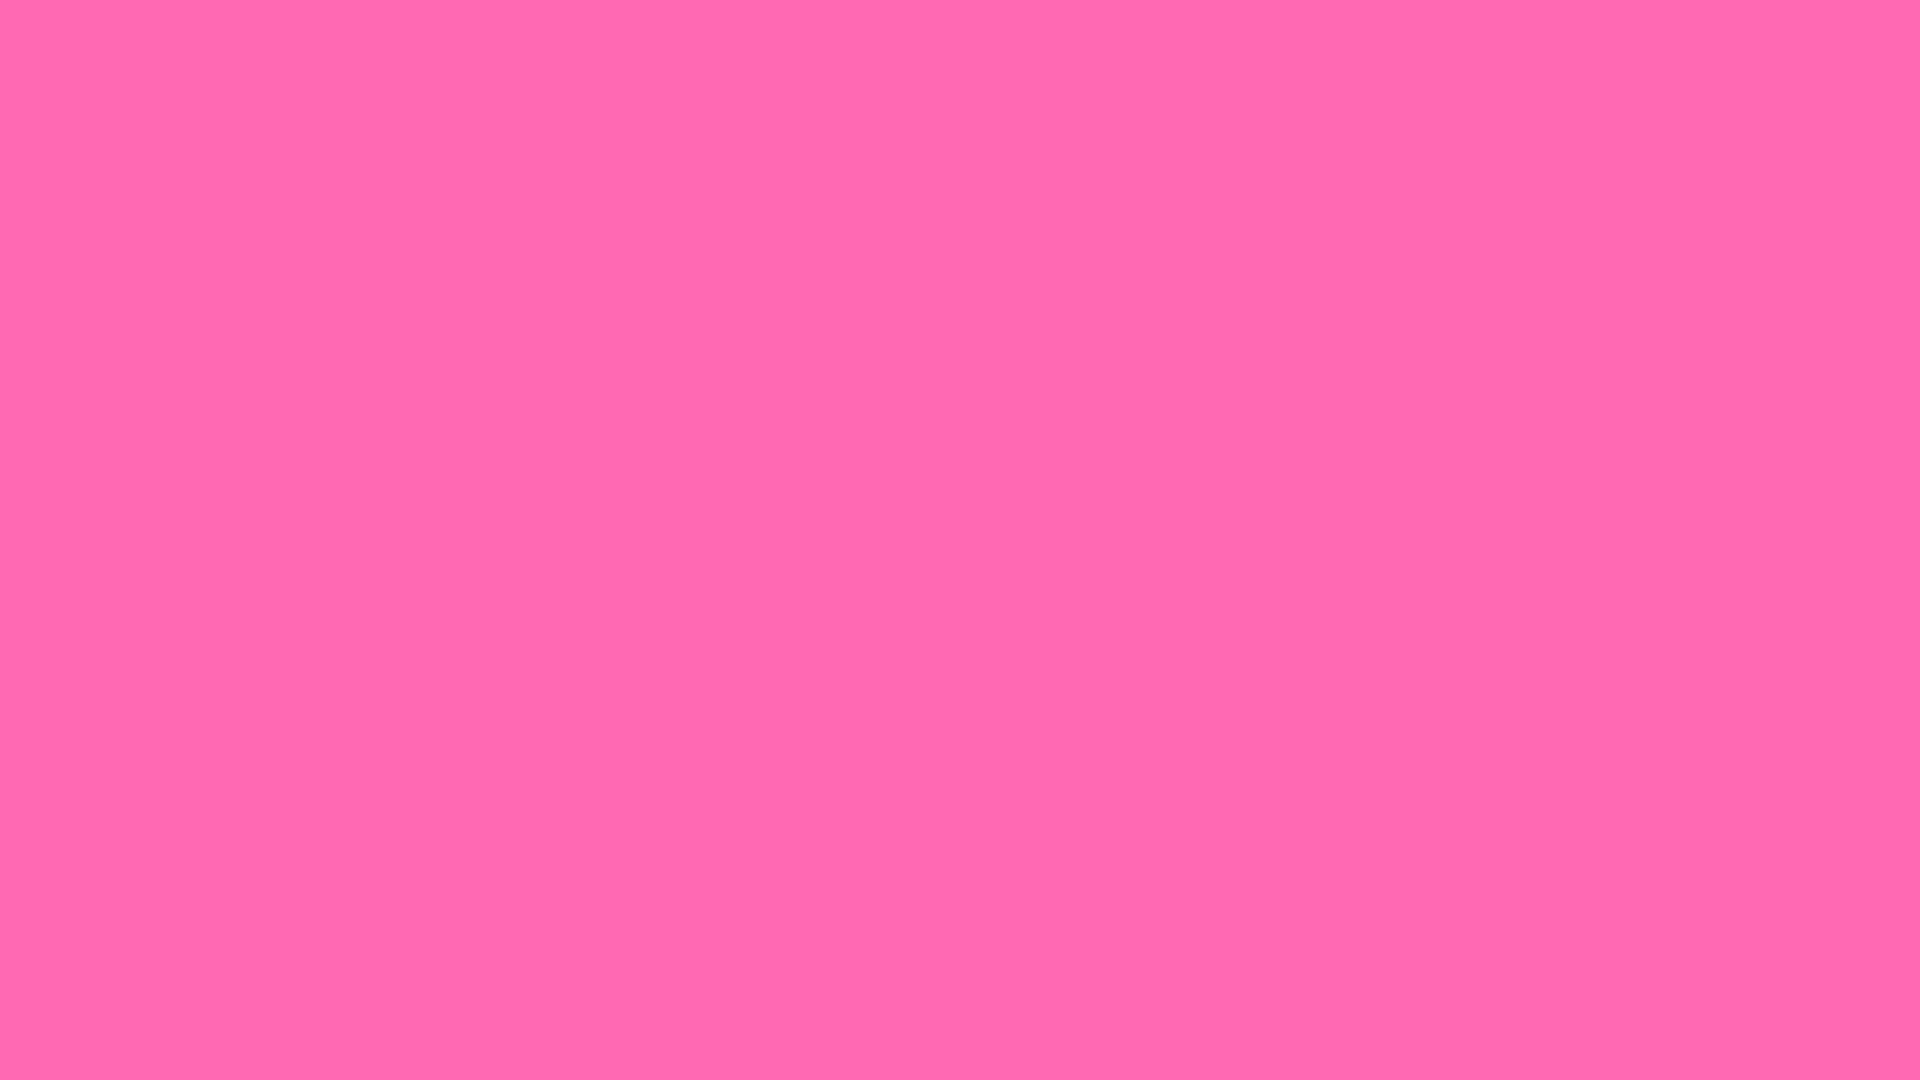 Solid Hot Pink Background Image Amp Pictures Becuo